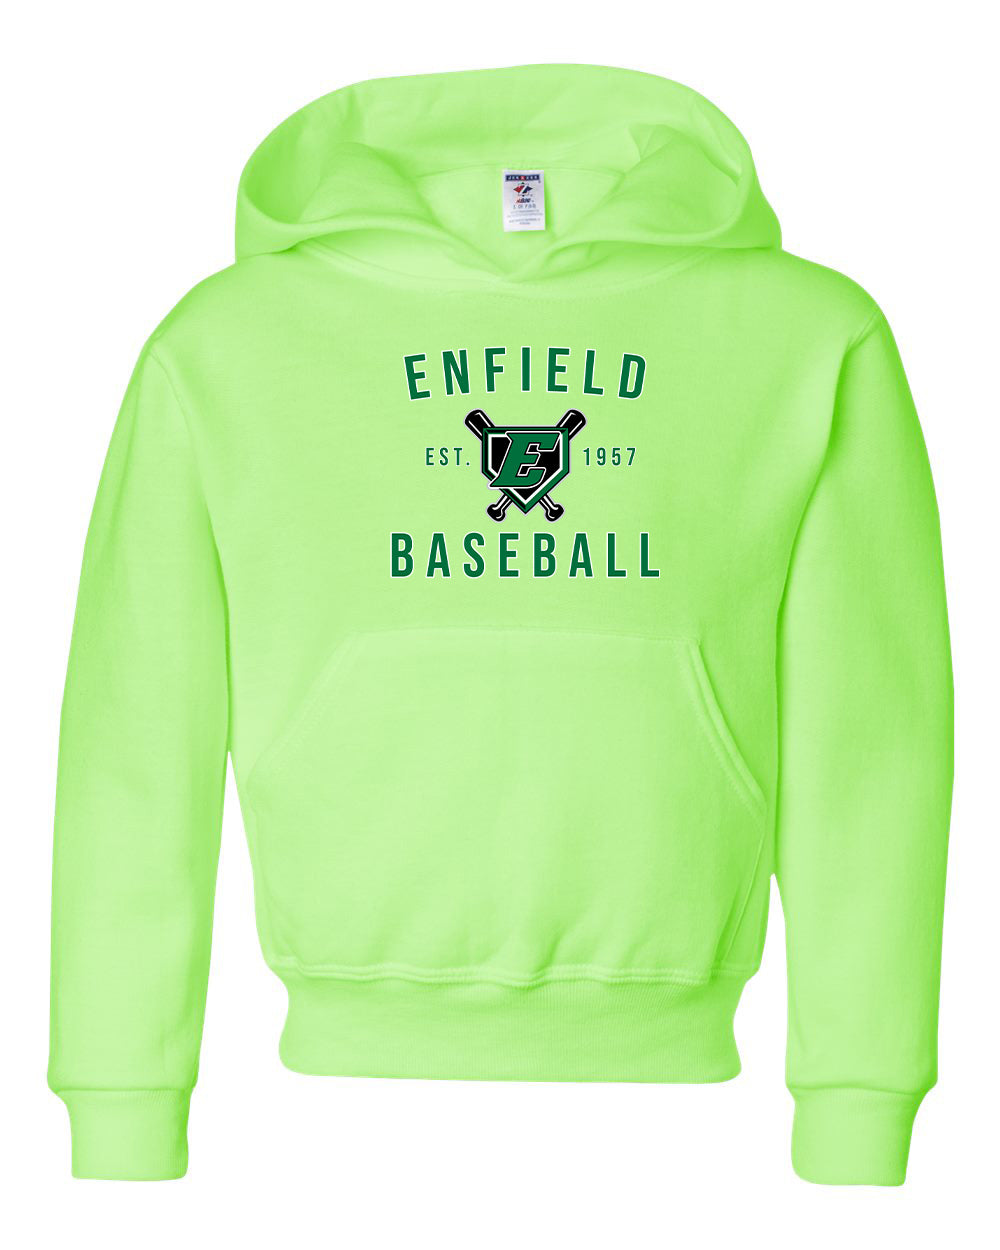 ELL Youth Hoodie "EST" - 996Y (color options available)